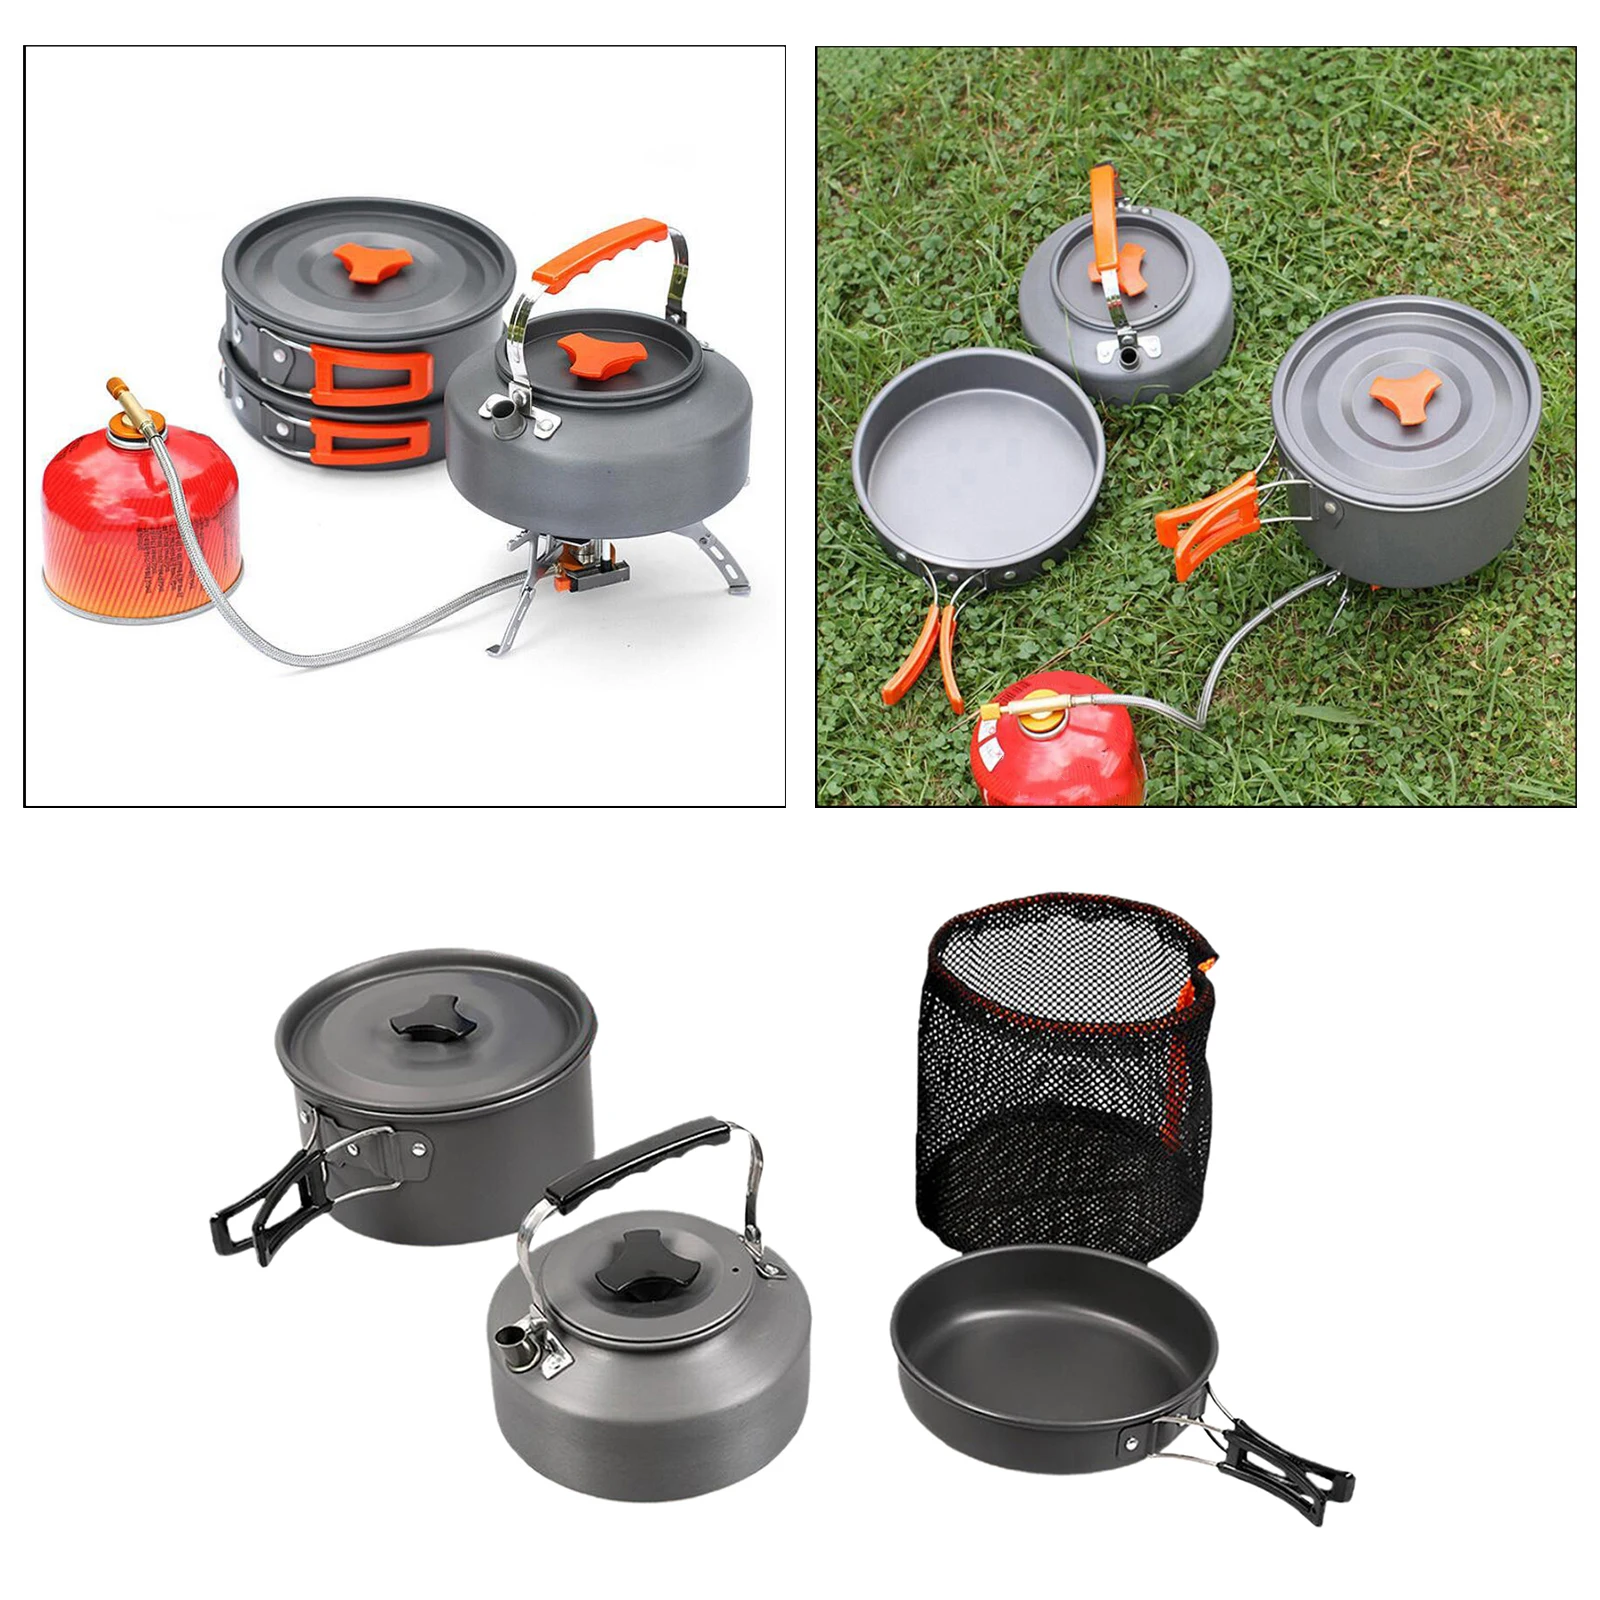 Portable Camping Cookware Mess Kit Outdoor Campfire Cookware for Hiking Backpacking, Folding and Lightweight